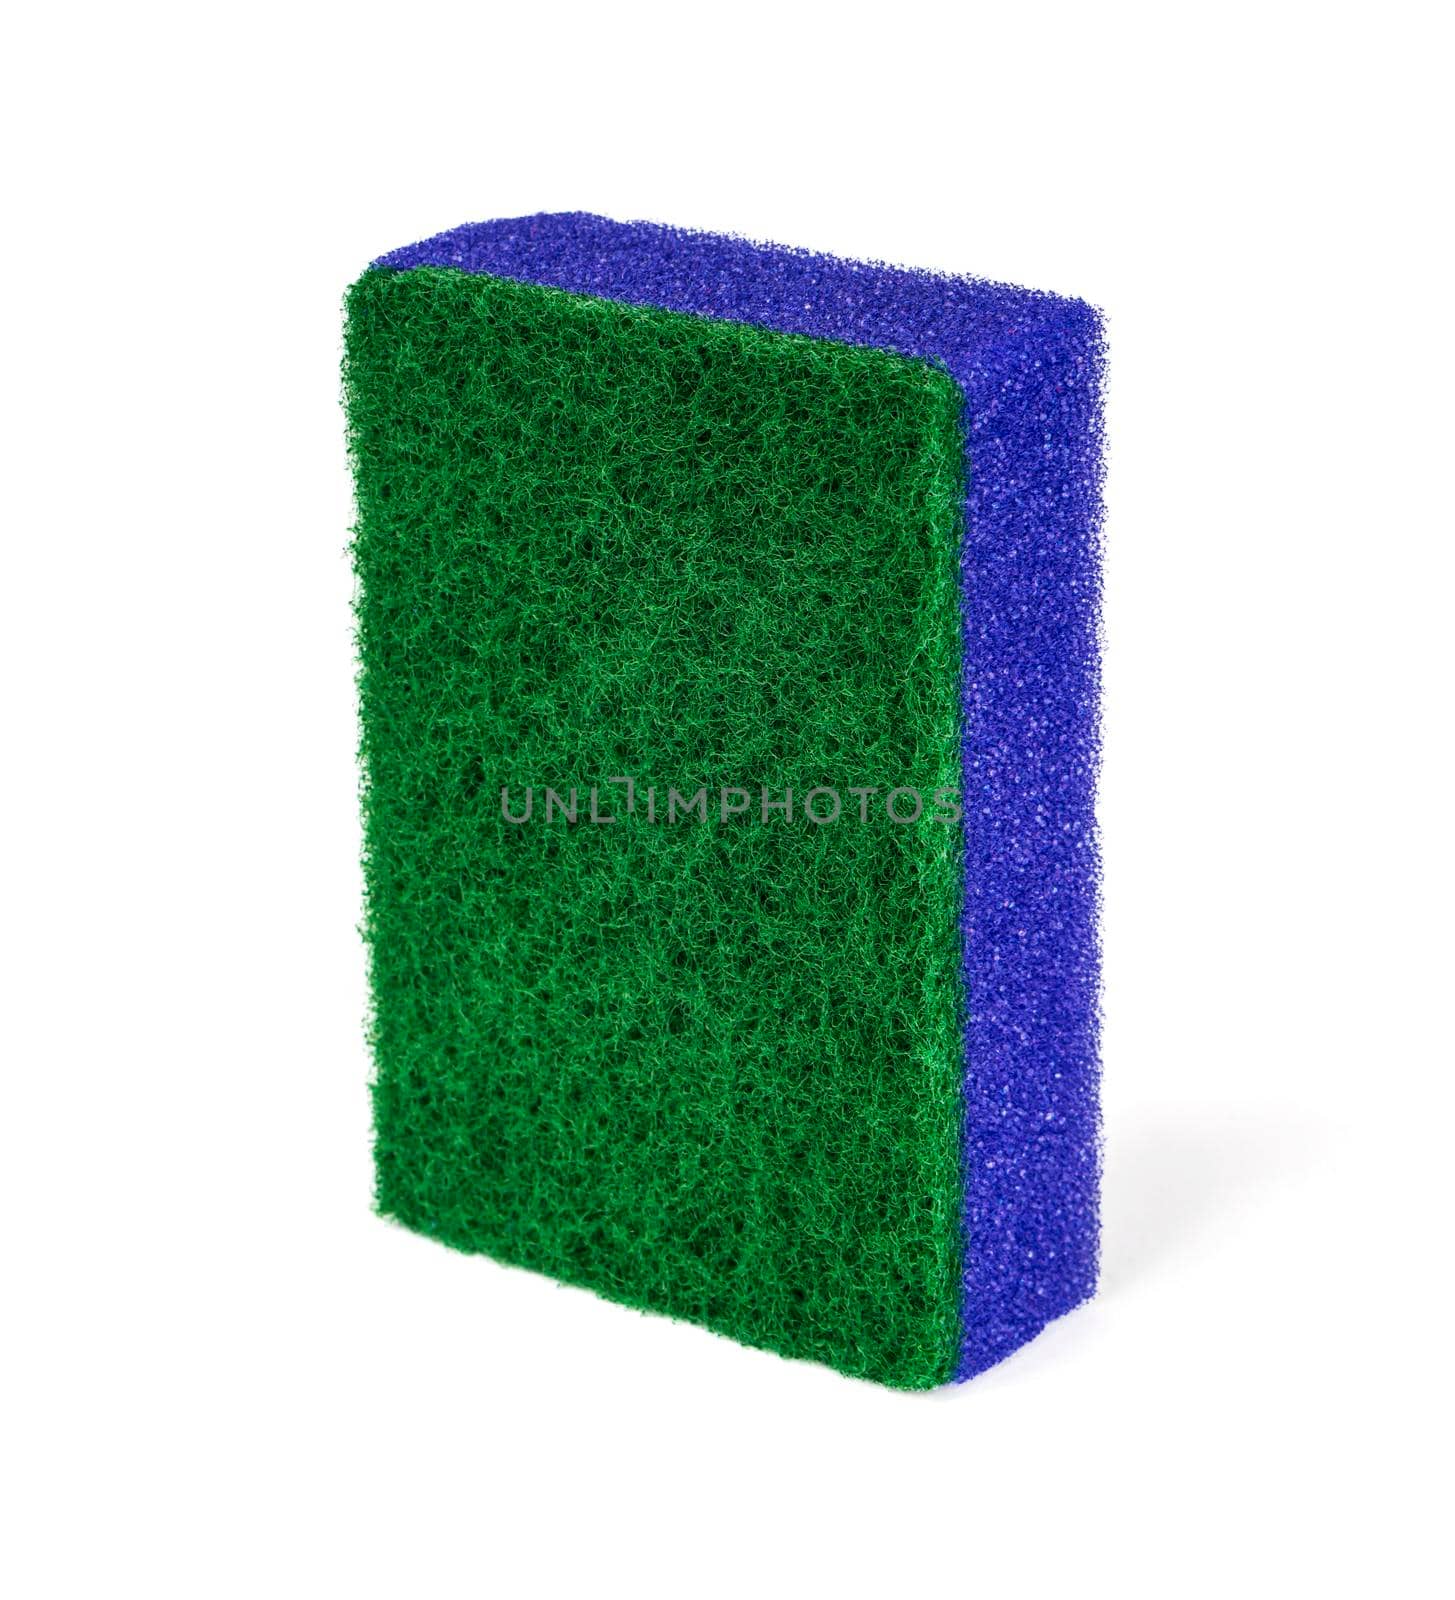 sponge for washing dishes on a white background in isolation